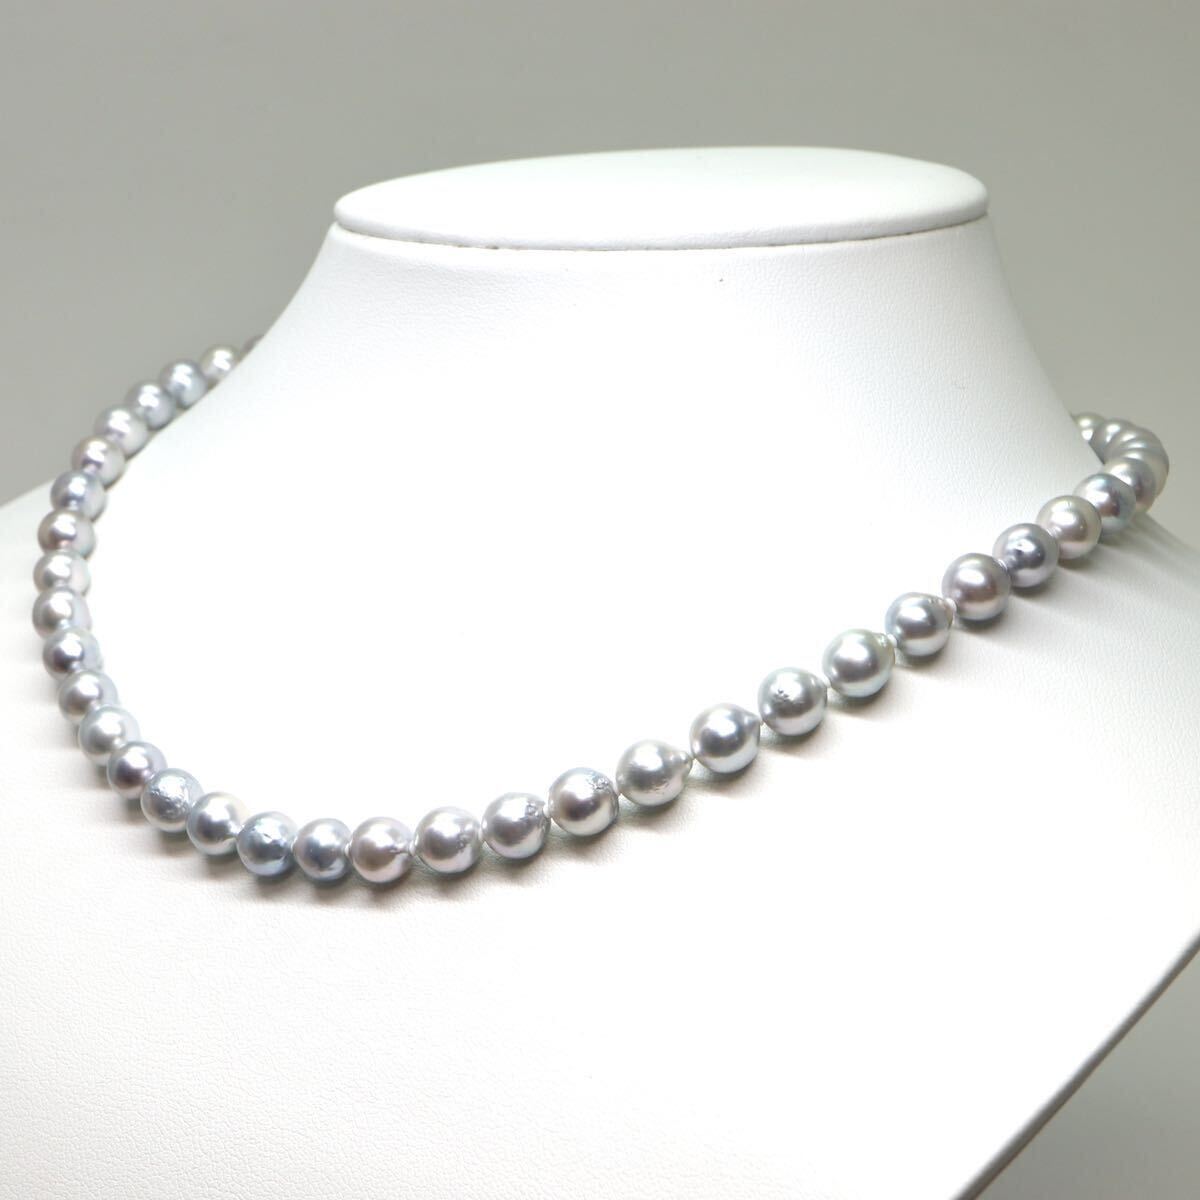 《K14WGアコヤ本真珠ネックレス》A 約7.0-7.5mm珠 31.3g 約43cm pearl necklace ジュエリー jewelry DH0/ZZ_画像3